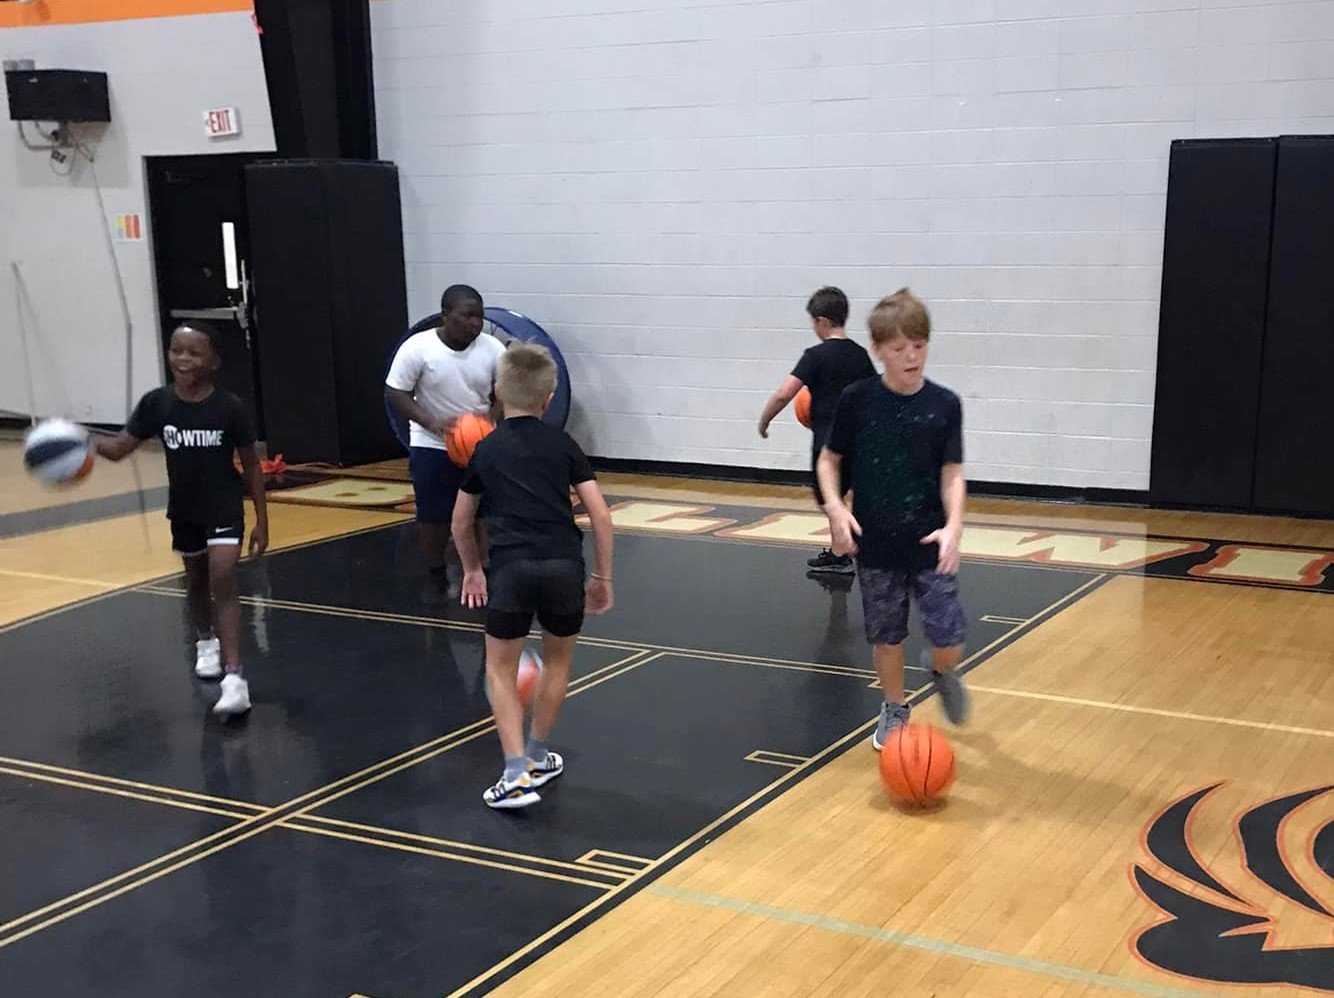 The second annual Little Tigers Youth Basketball Camp featured instruction, competitions and prizes for younger athletes to help develop their skills.